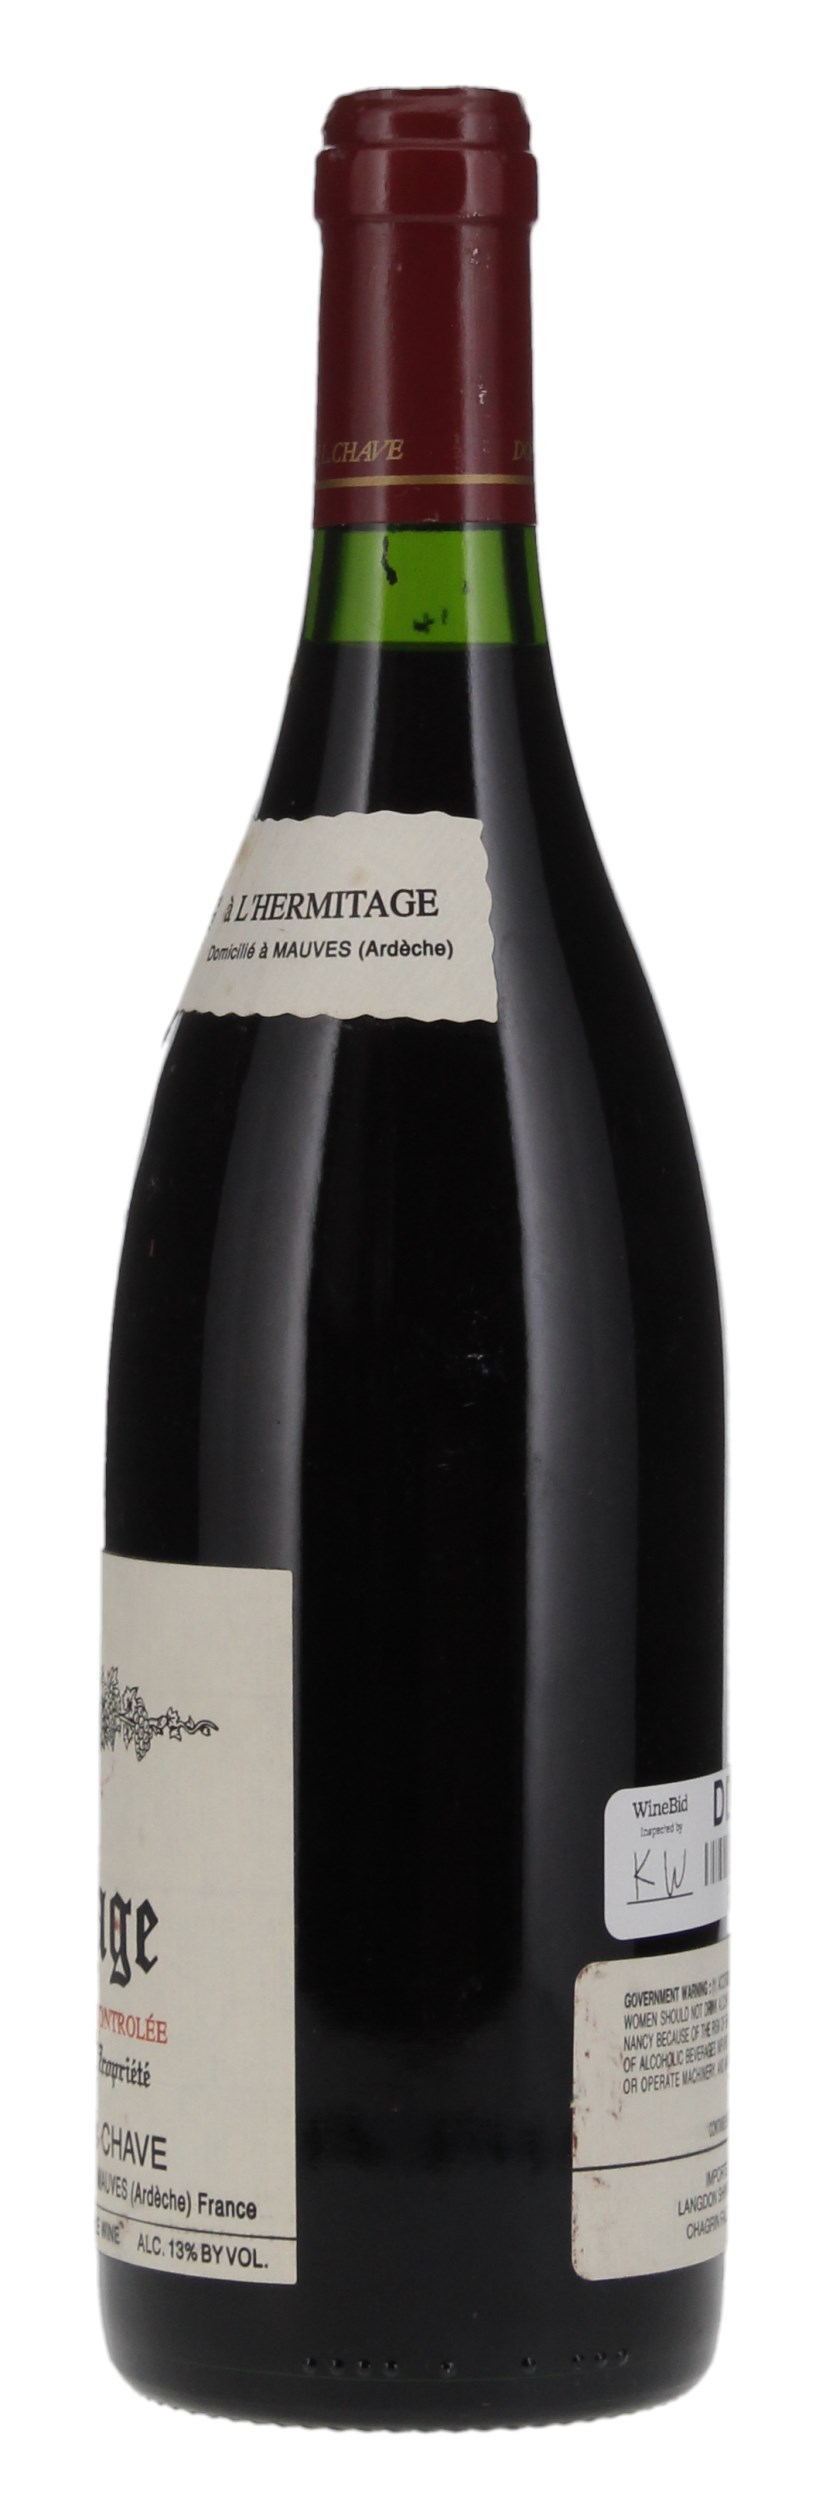 1990 Jean-Louis Chave Hermitage, 750ml